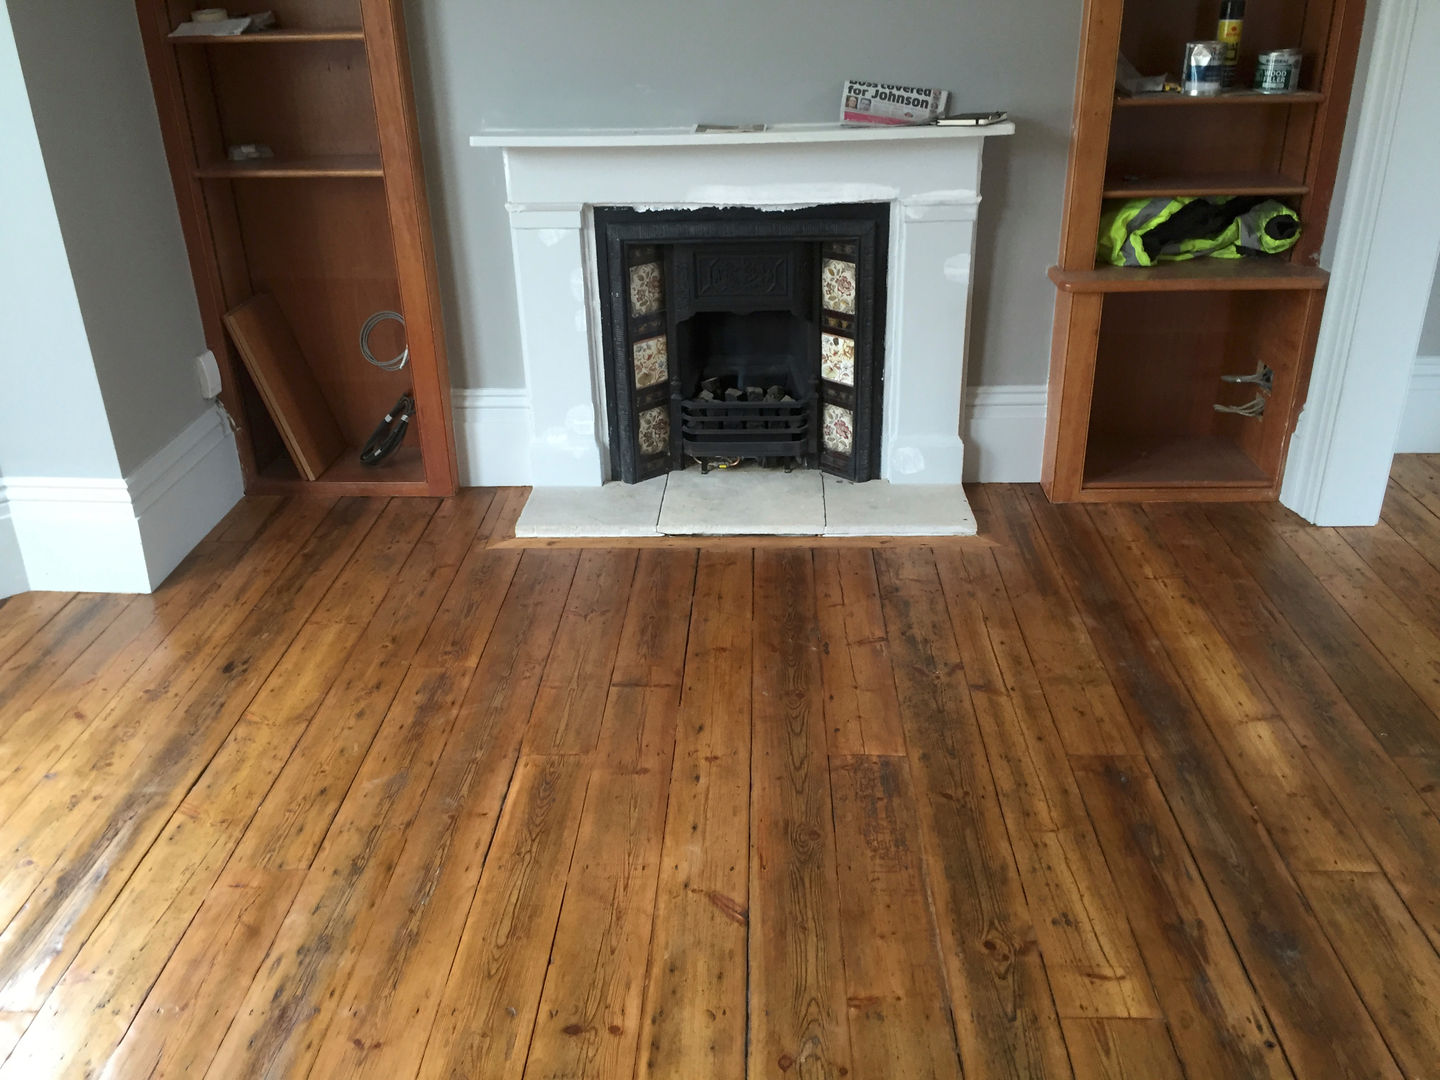 Reclaimed Pine floorboards The British Wood Flooring Company Soggiorno classico Reclaimed Pine floorboards